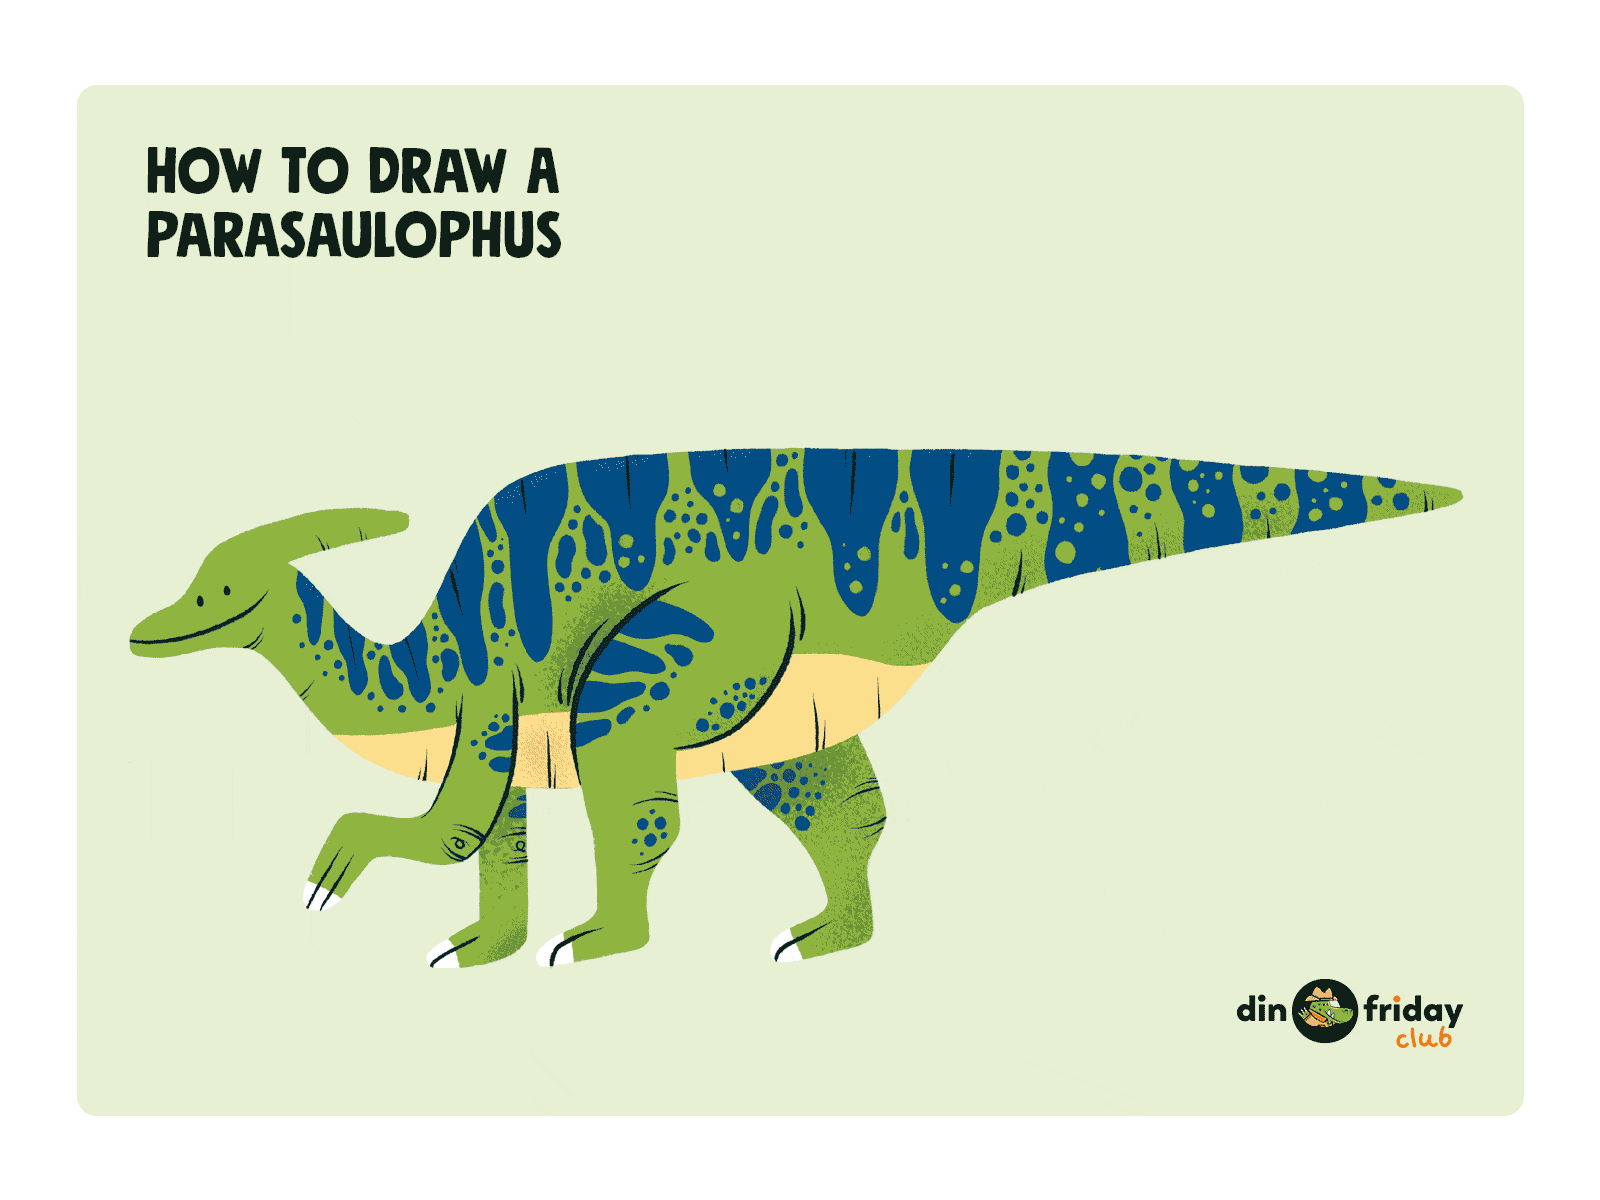 How to draw a Parasaulophus